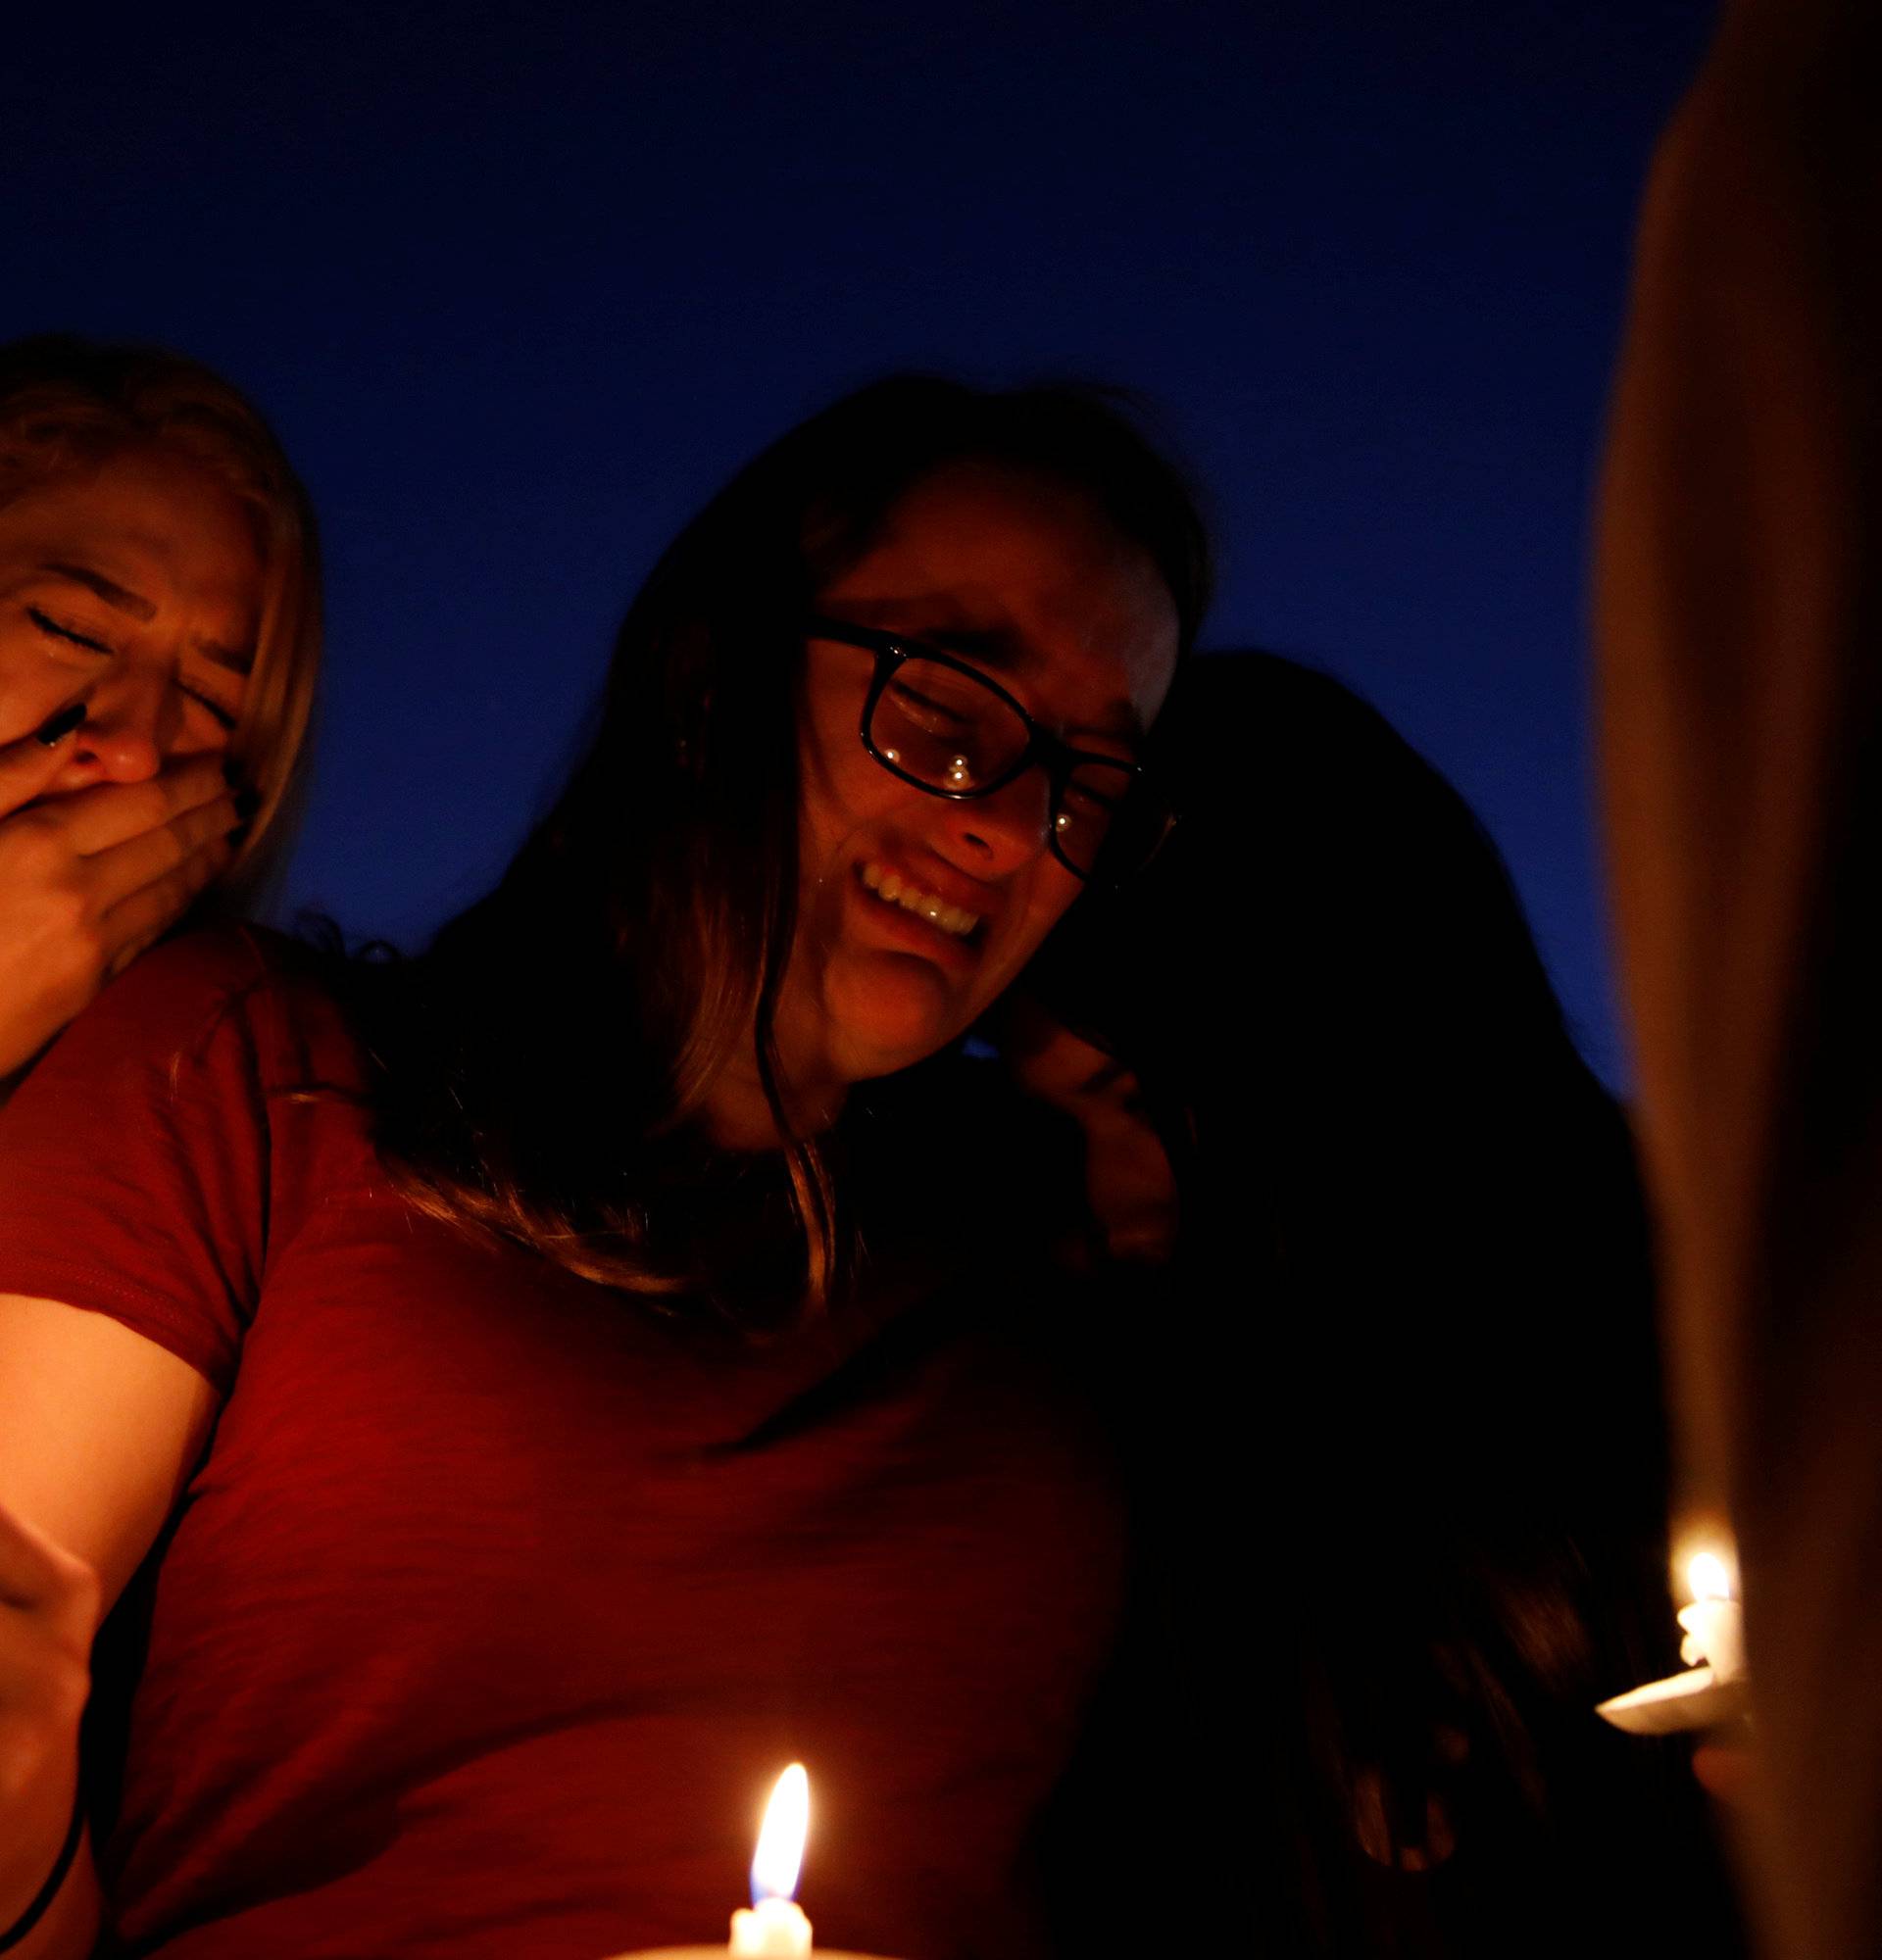 Students mourn during a candlelight vigil for victims of yesterday's shooting at nearby Marjory Stoneman Douglas High School, in Parkland